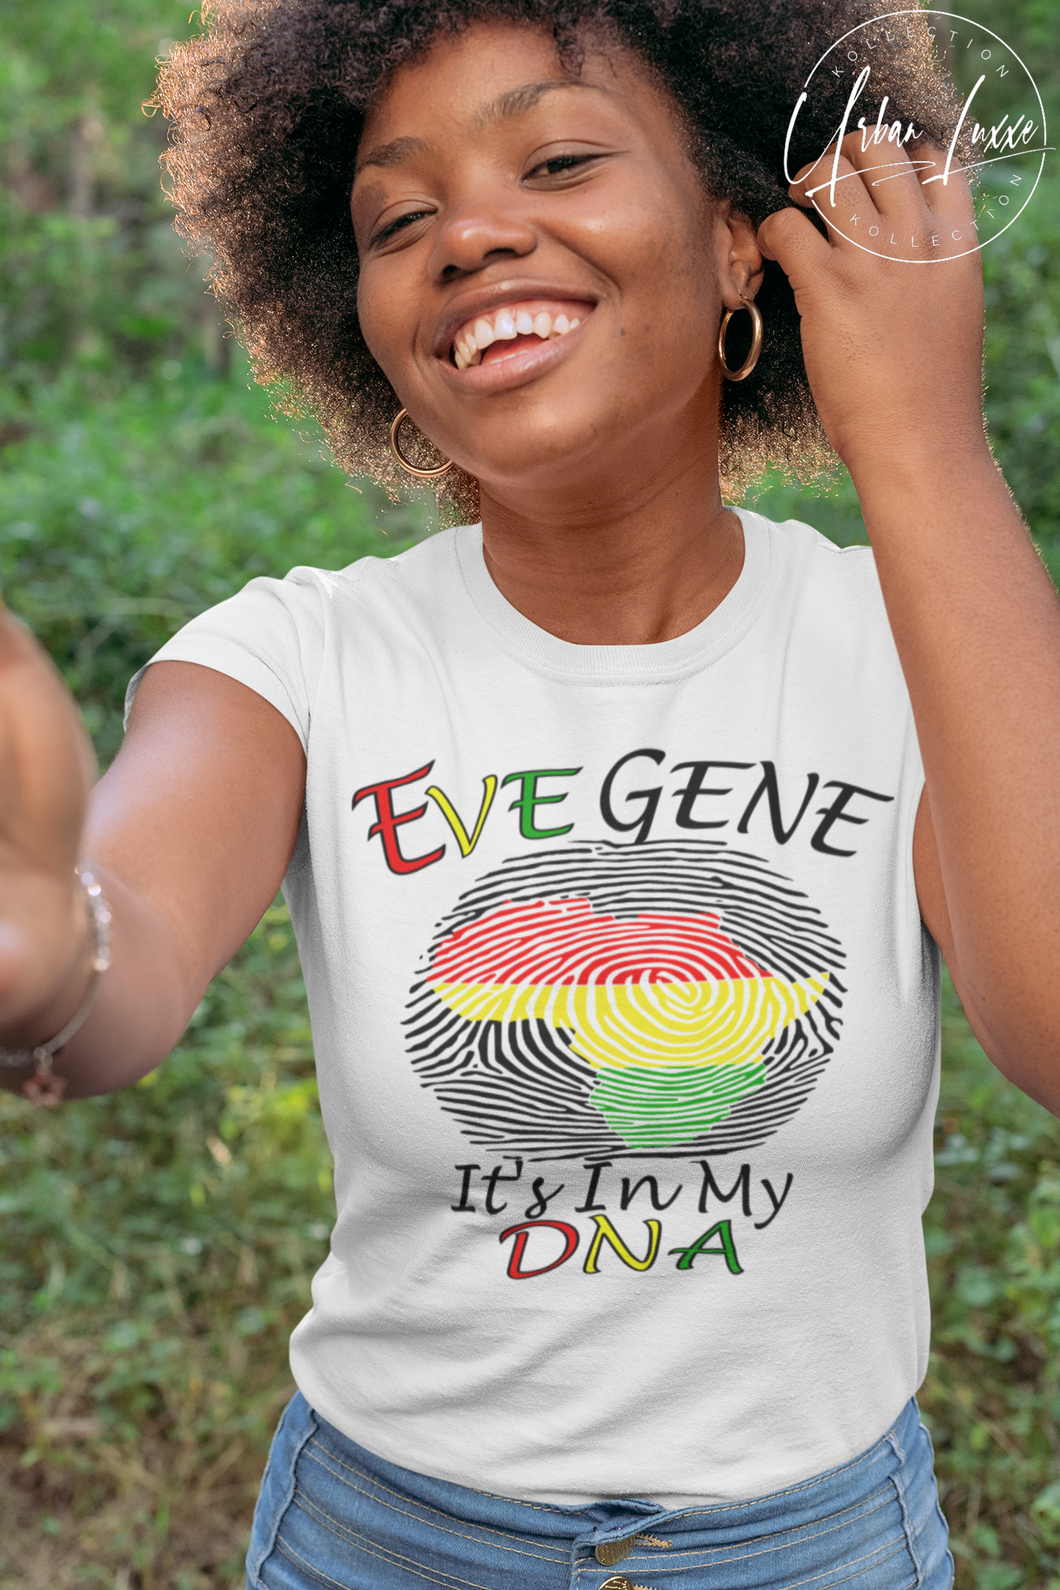 Eve Gene....It’s In My DNA T-shirt